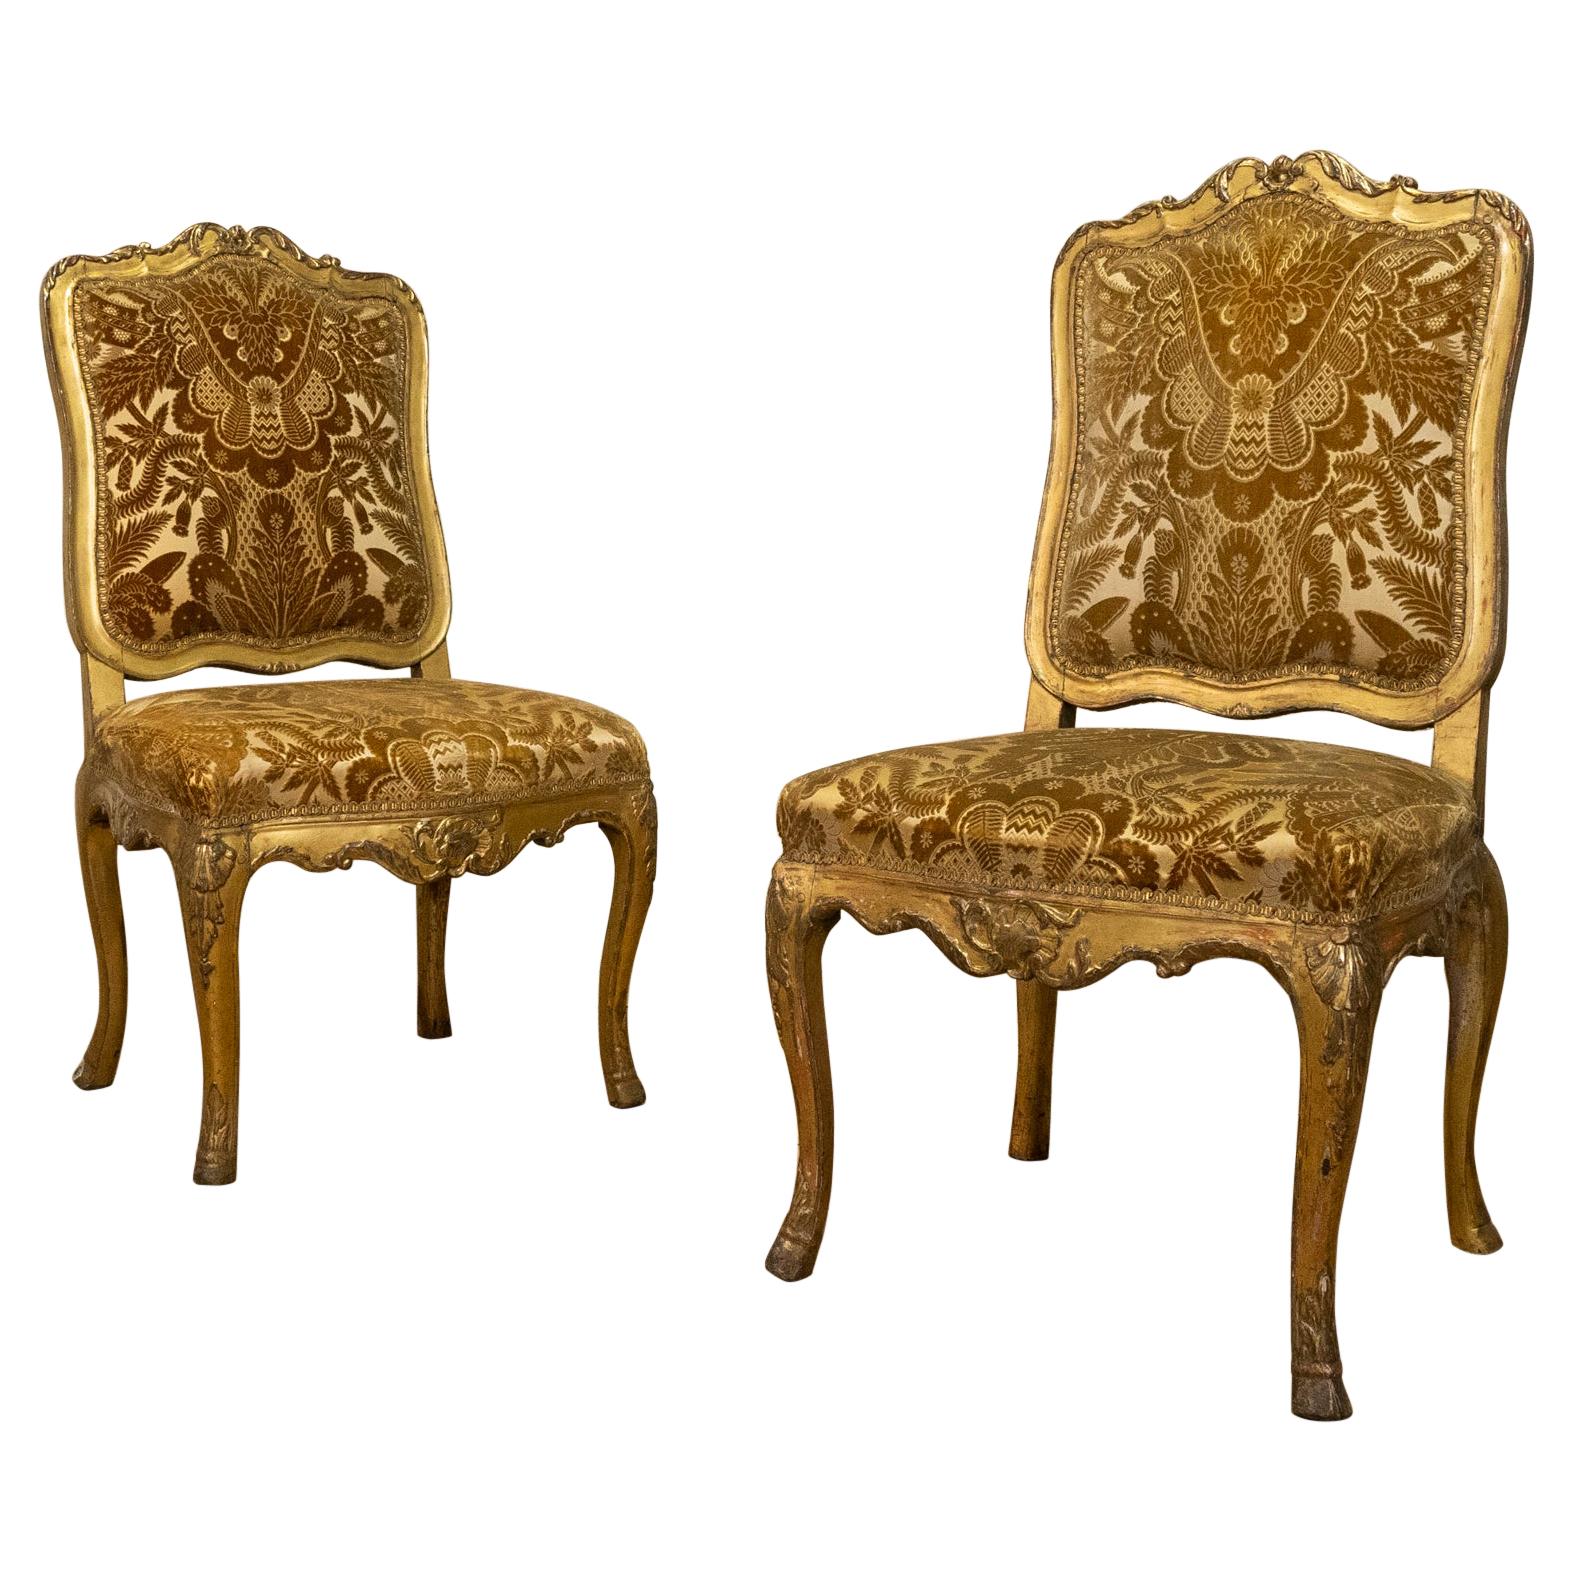 Pair of 18th Century French Louis XV Giltwood Side Chairs Upholstered - Gold 